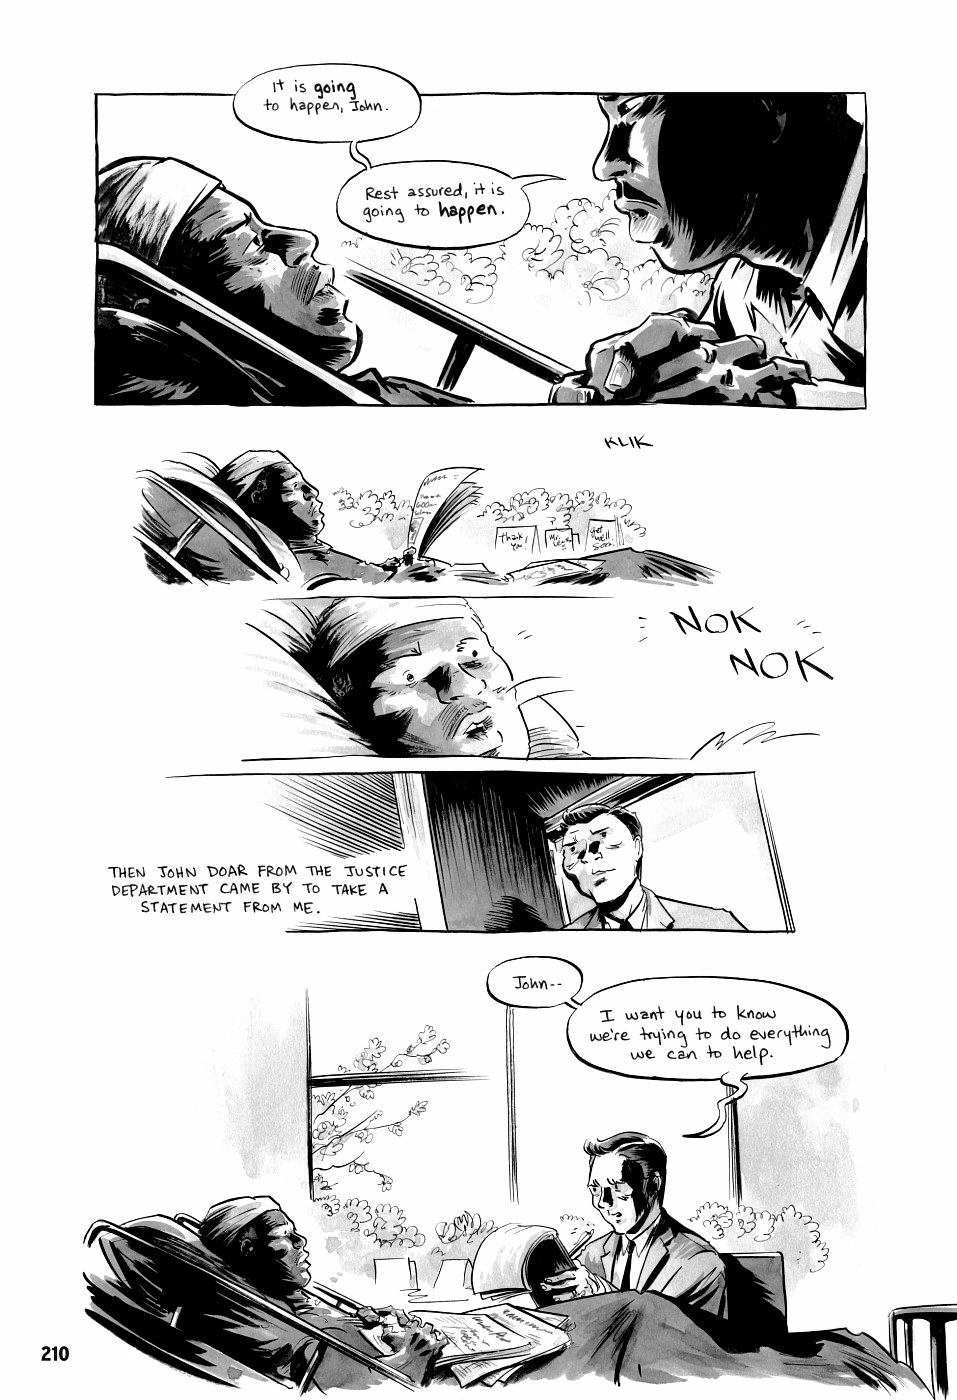 page 210 of march book three graphic novel